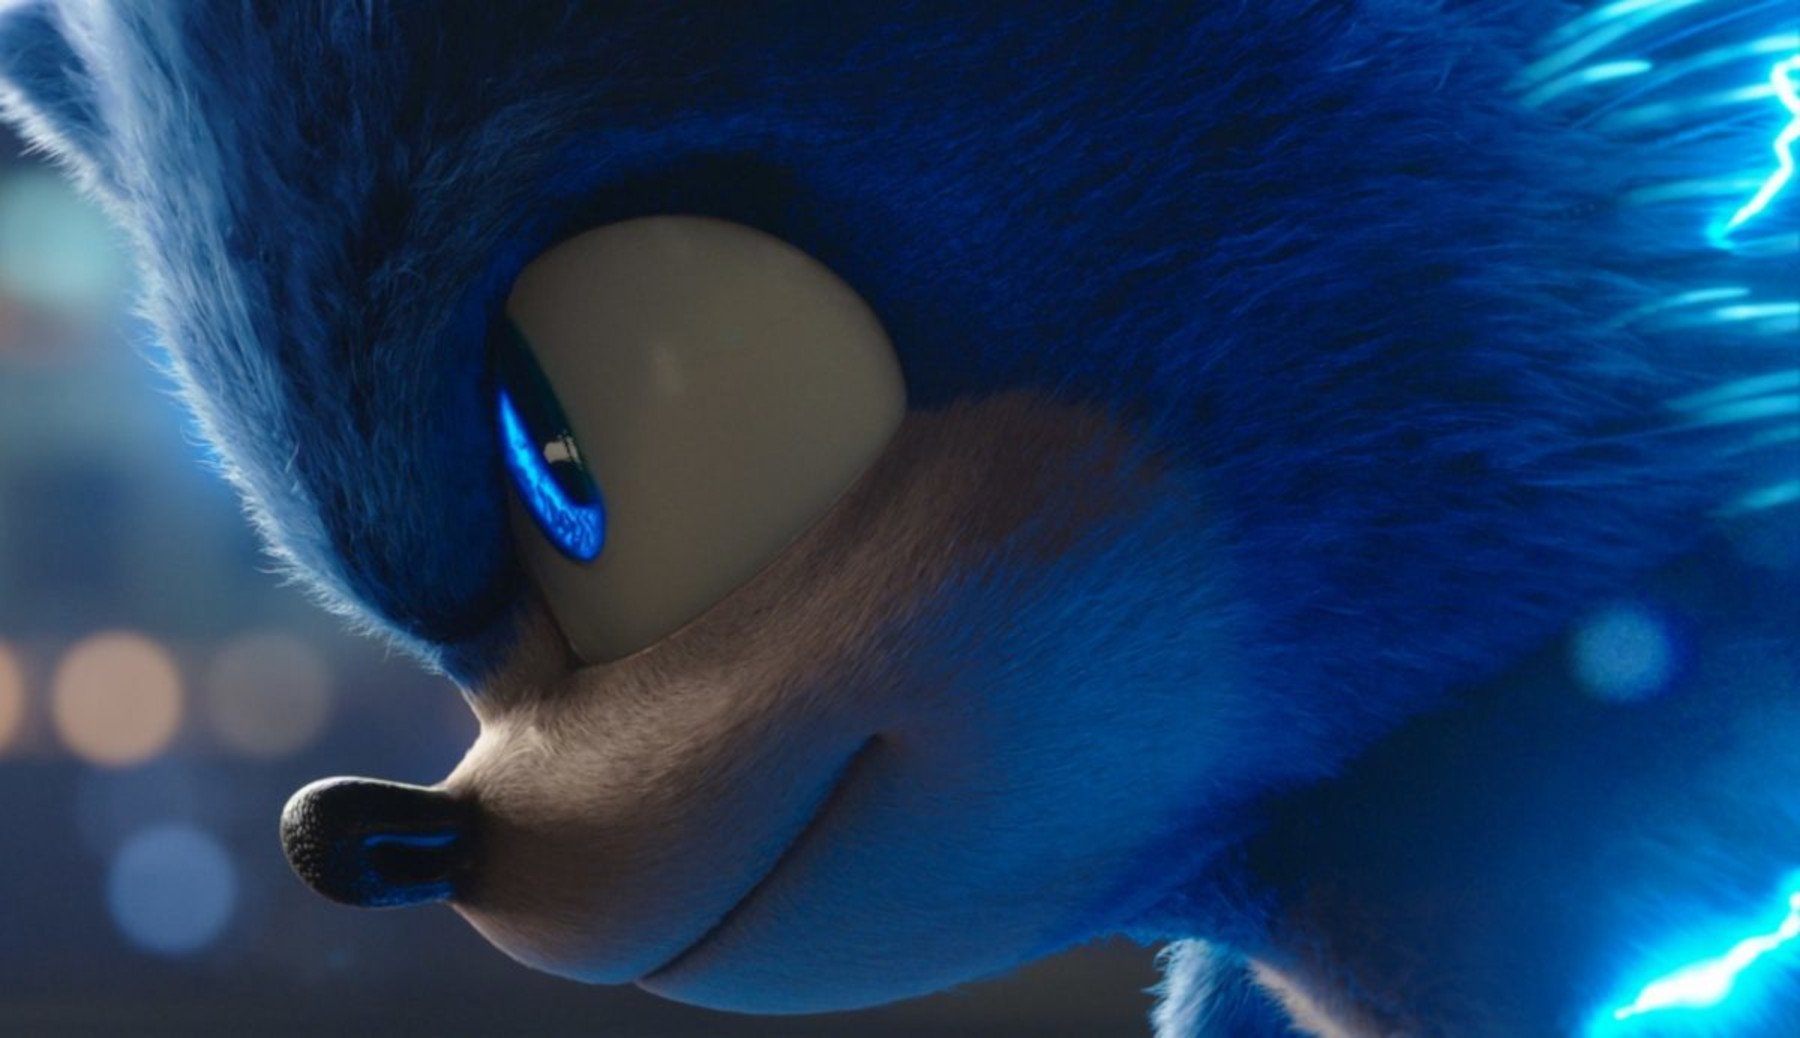 Sonic (Ben Schwartz) in 'Sonic the Hedgehog.' The image shows a close-up side profile of the character's face. He looks like he's about to run.